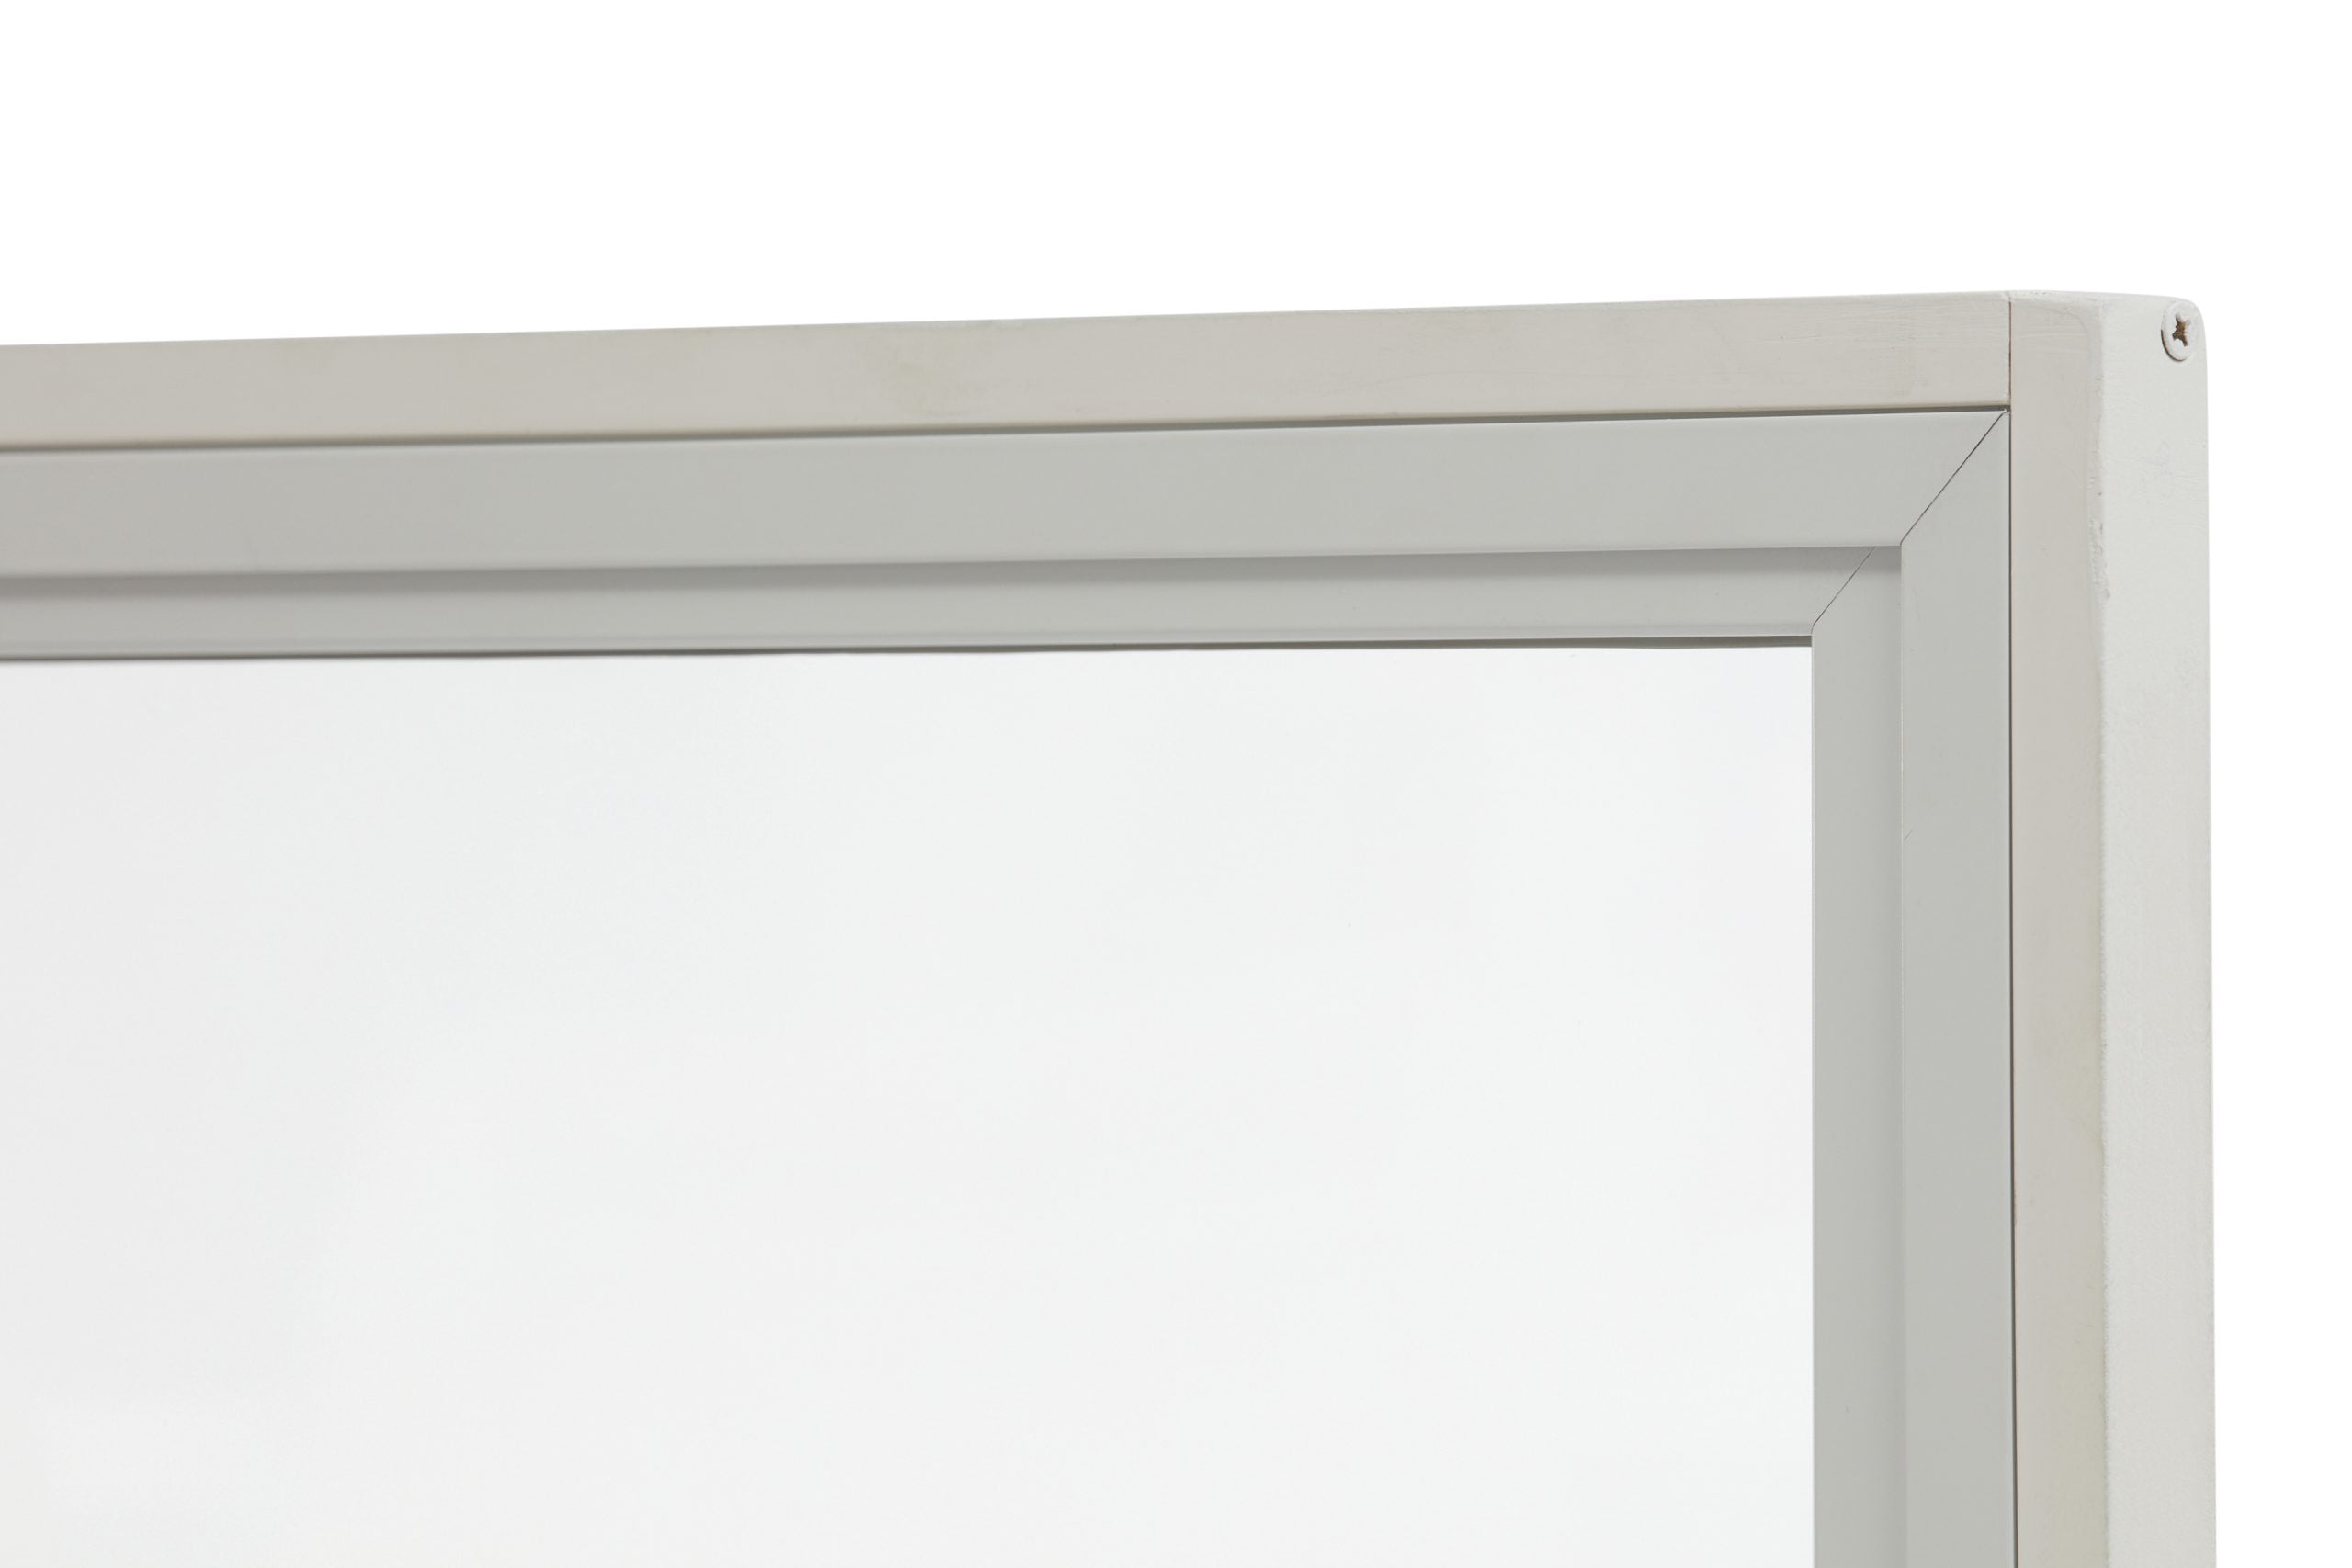 Lift Out Secondary Glazing For Professionals | Granada Secondary Glazing